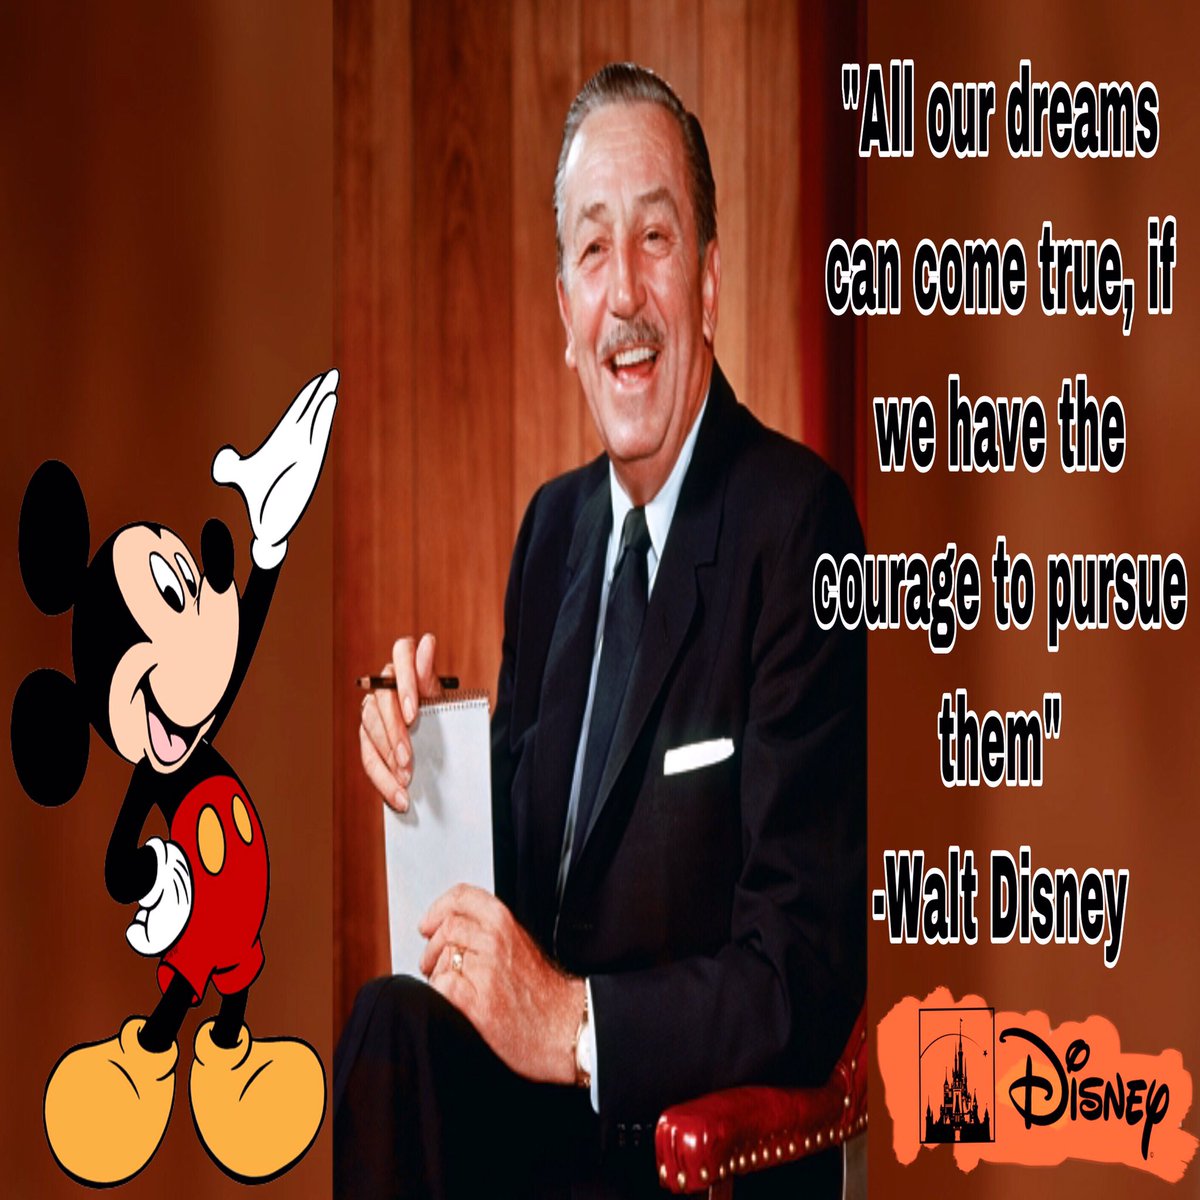 From the man himself 🎬 #motivated #goodmorning #WaltDisney #motivatingquote #passiondriven #like #follow #mickeymouse #biggerthanthemouse #biggerthanthemousehouse